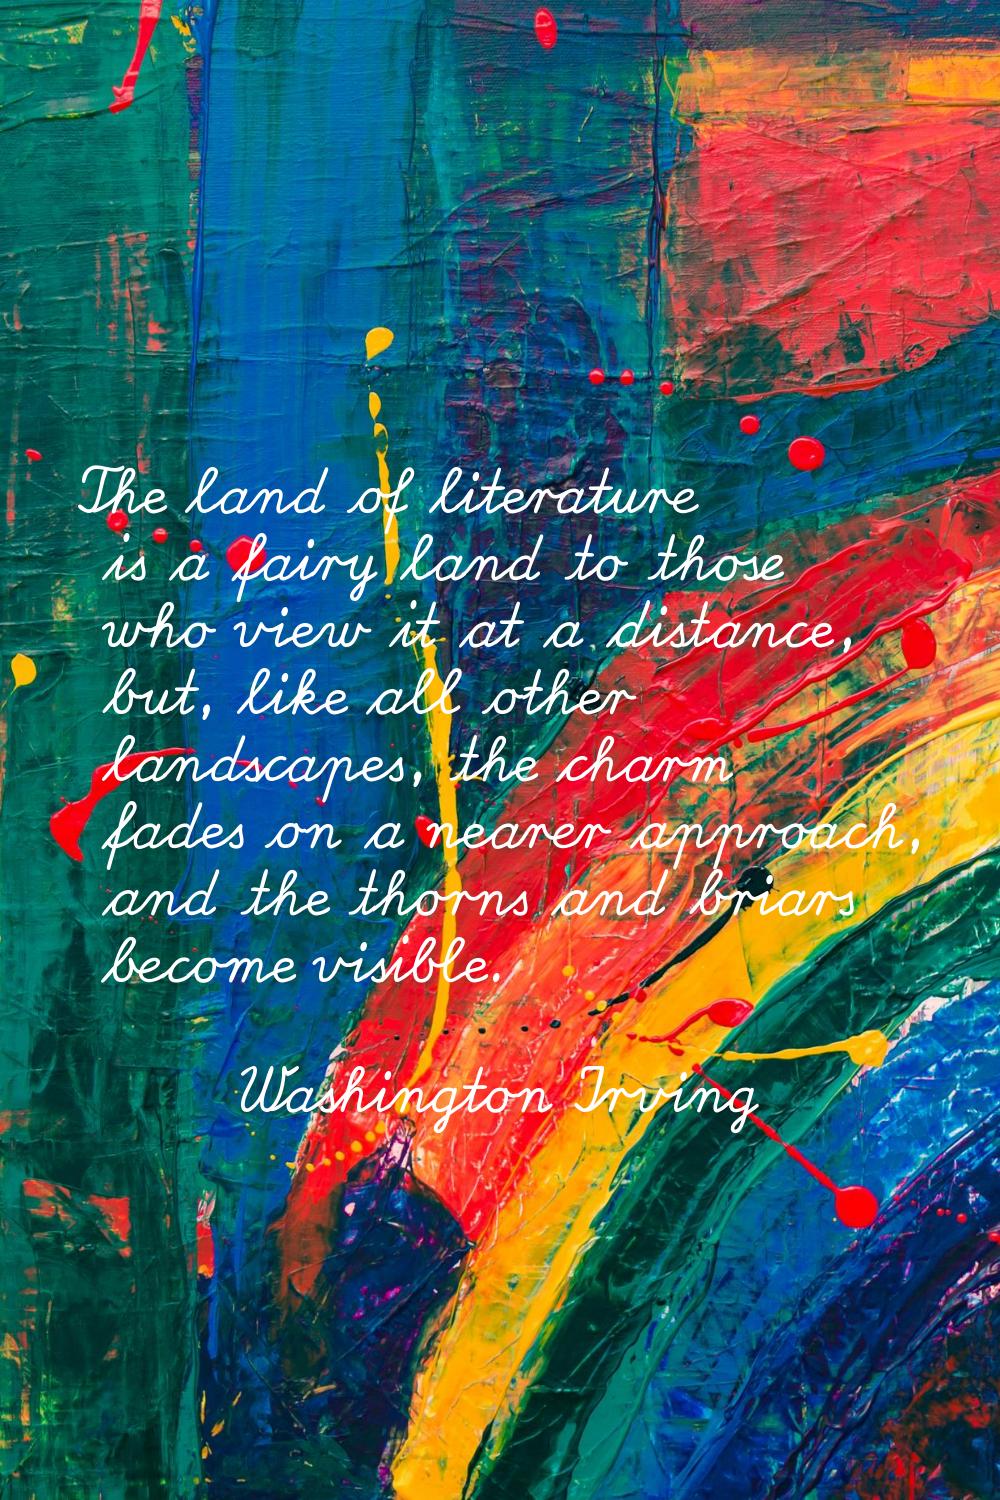 The land of literature is a fairy land to those who view it at a distance, but, like all other land